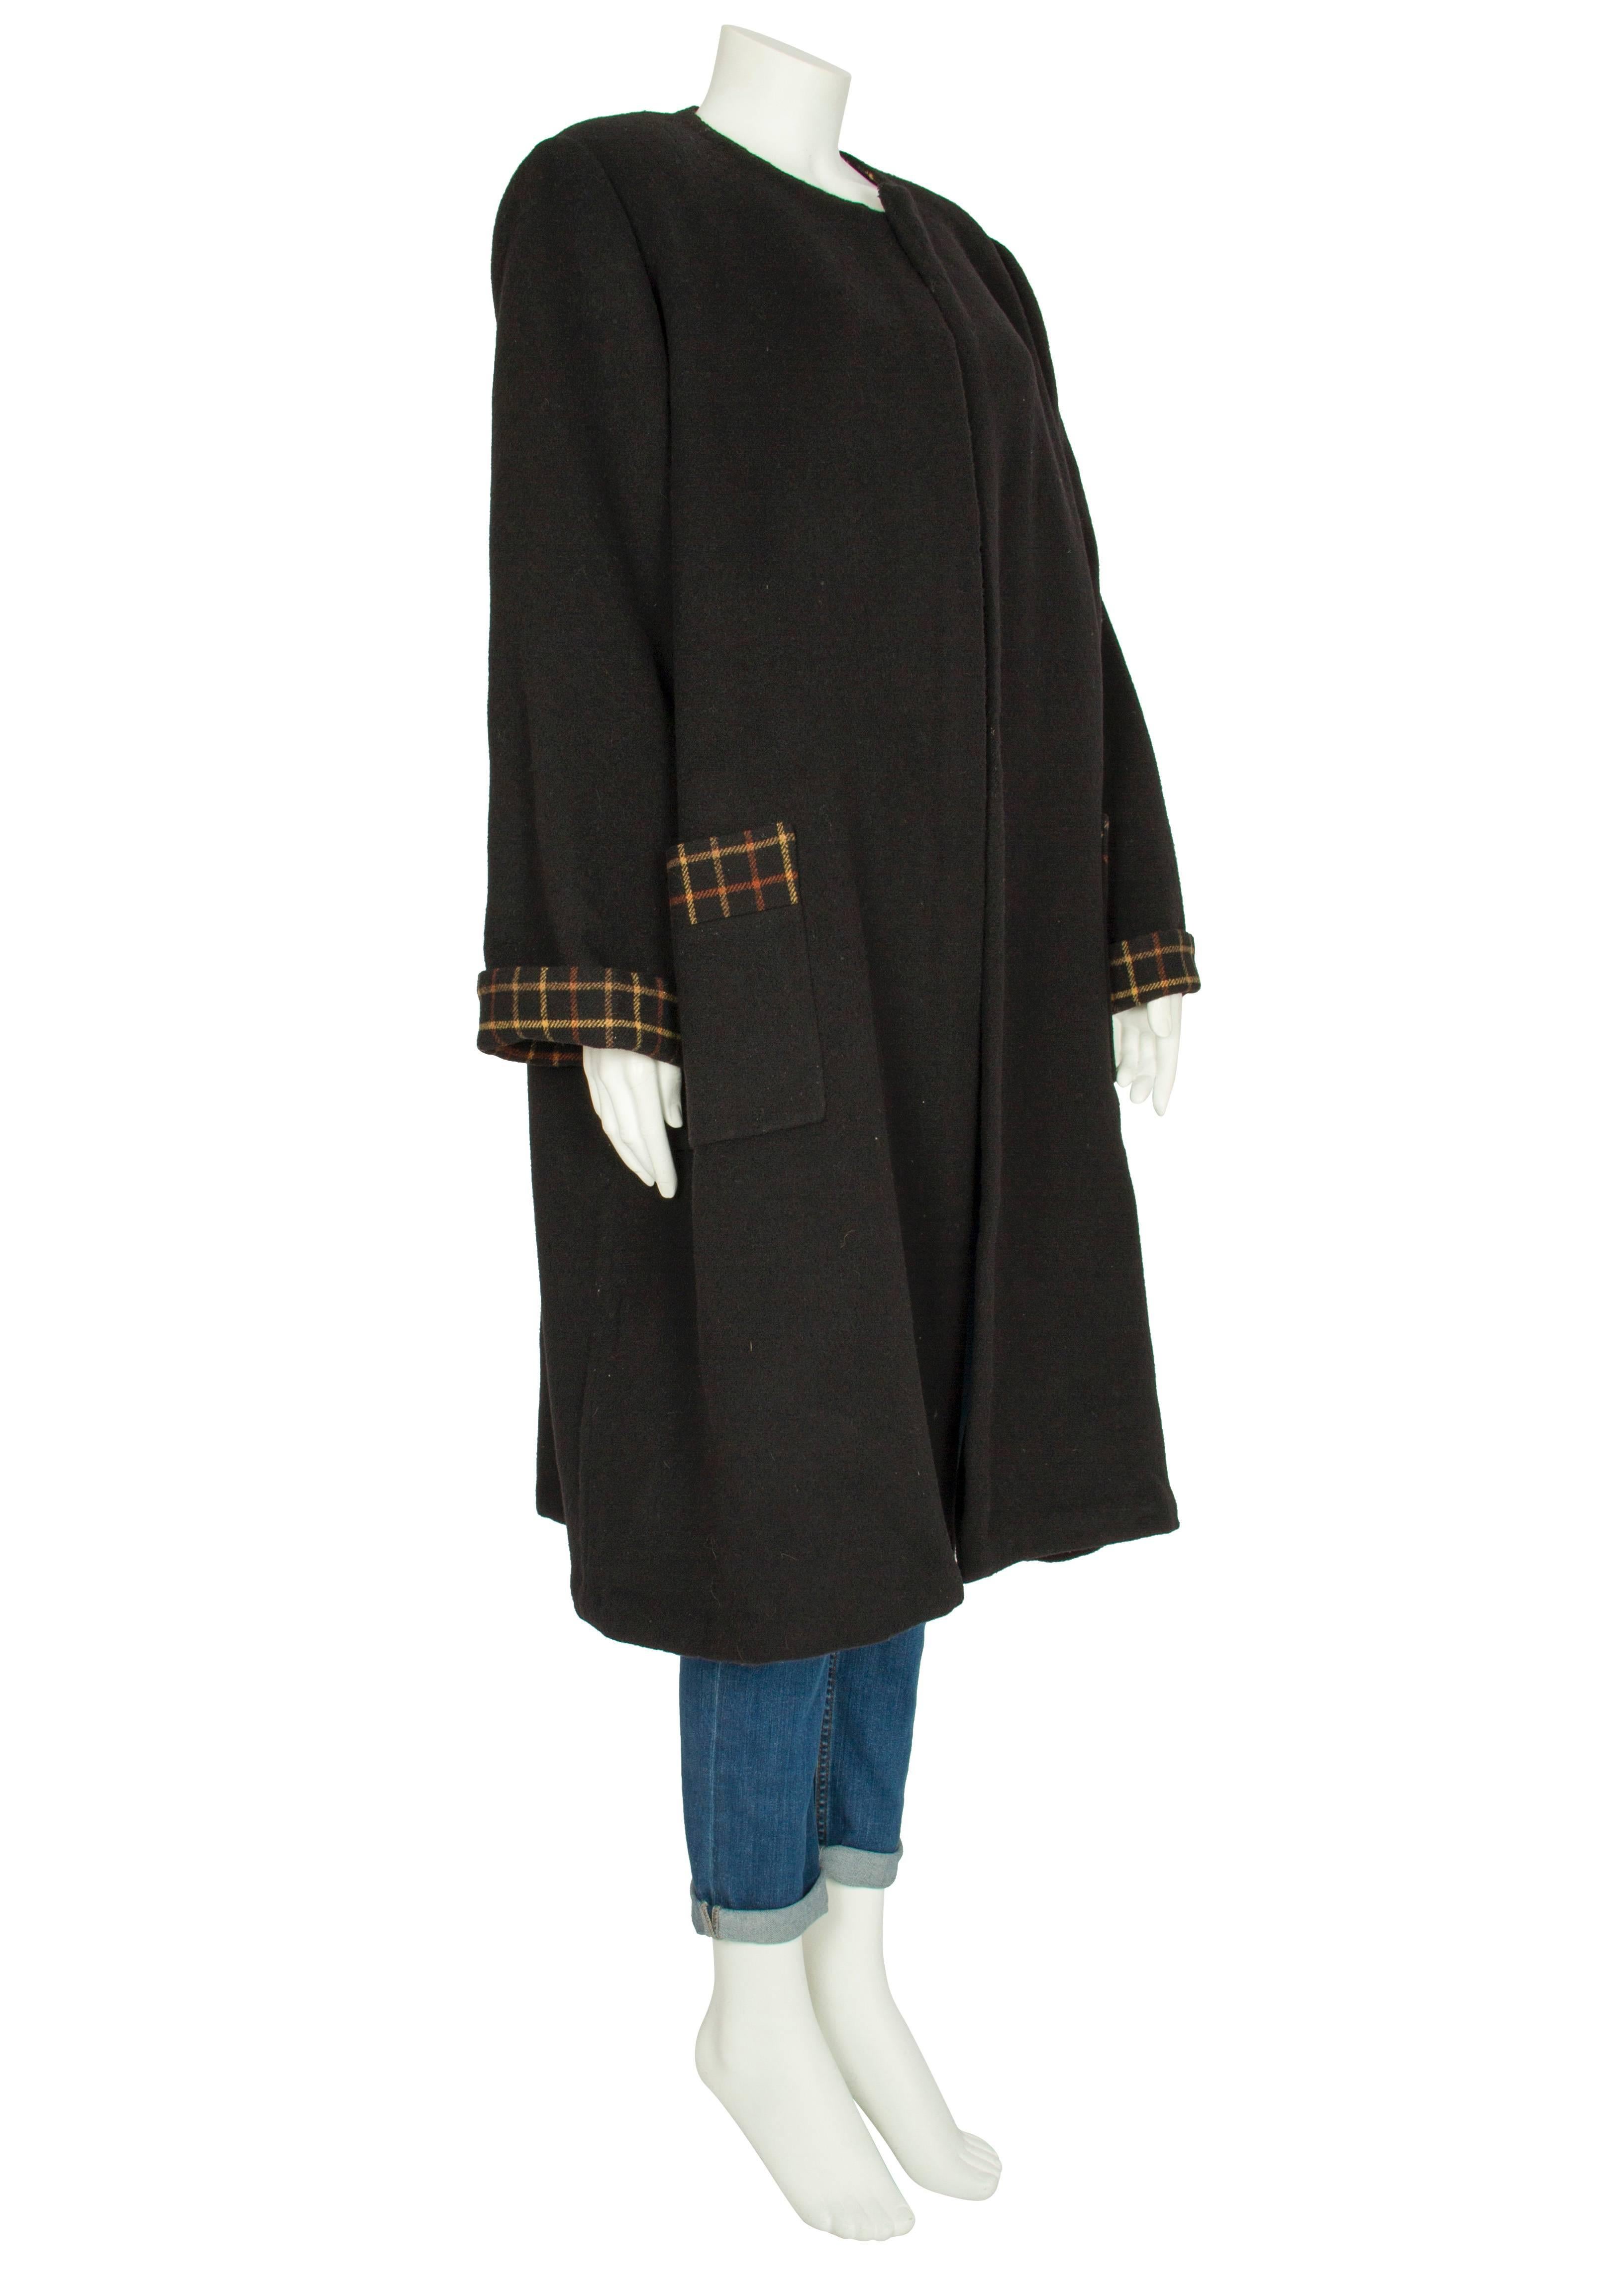 Women's 1960s Harald Black Wool Overcoat with Caramel and Brown Check Lining For Sale